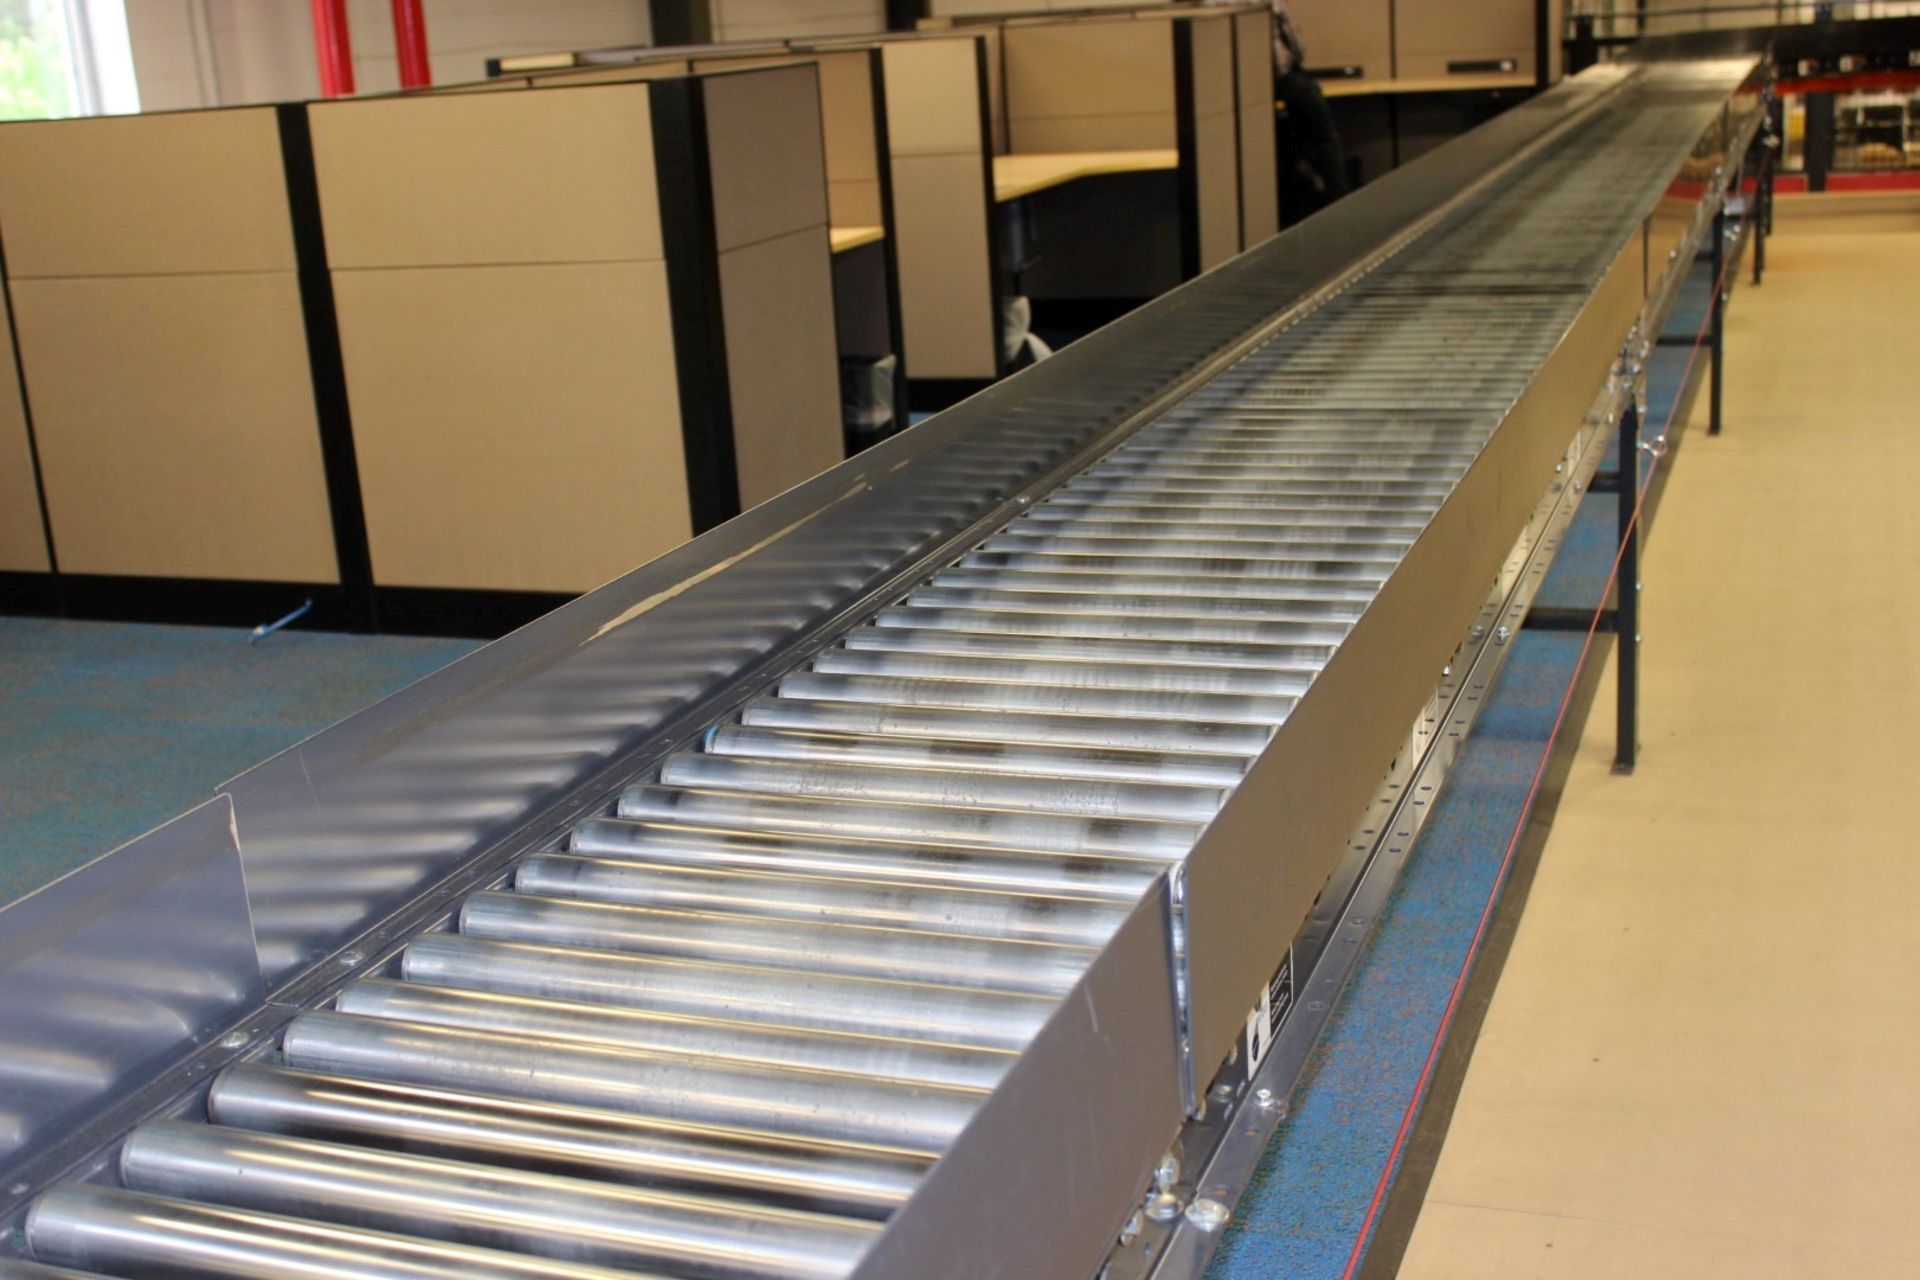 XENOROL R3M13 24"" POWERED CONVEYOR SYSTEM WITH LIFT GATE SYSTEM - Image 5 of 8